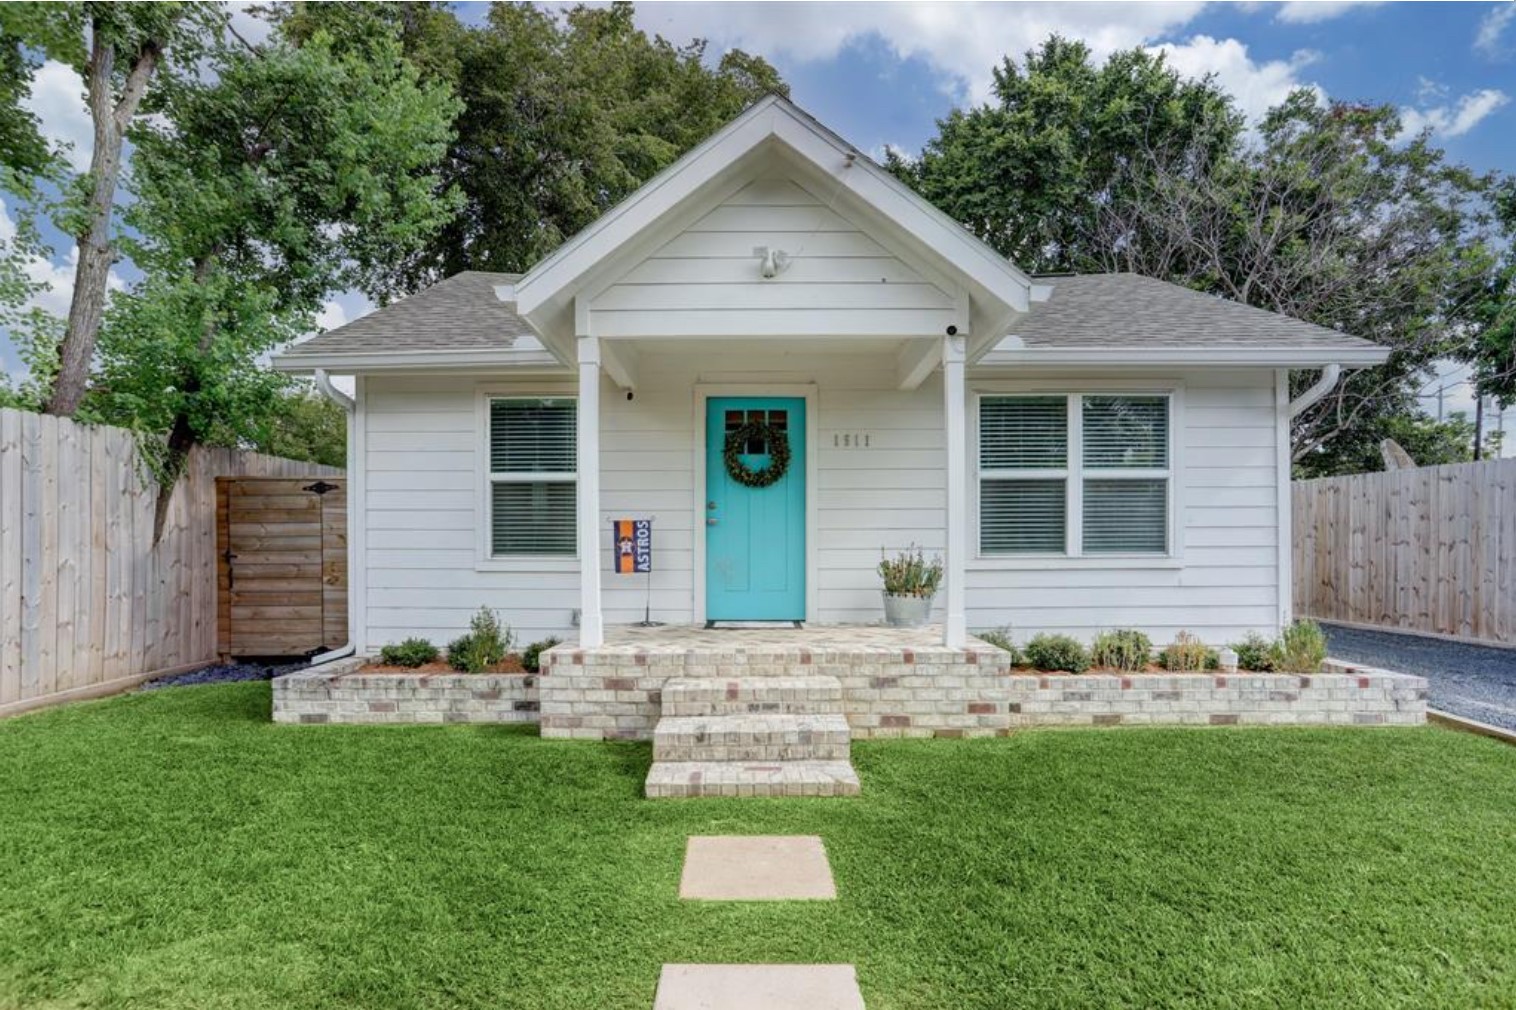 Welcome to 1511 McNeil, located in The Northside. This home has been remodeled from the inside out and is ready to be made a home!